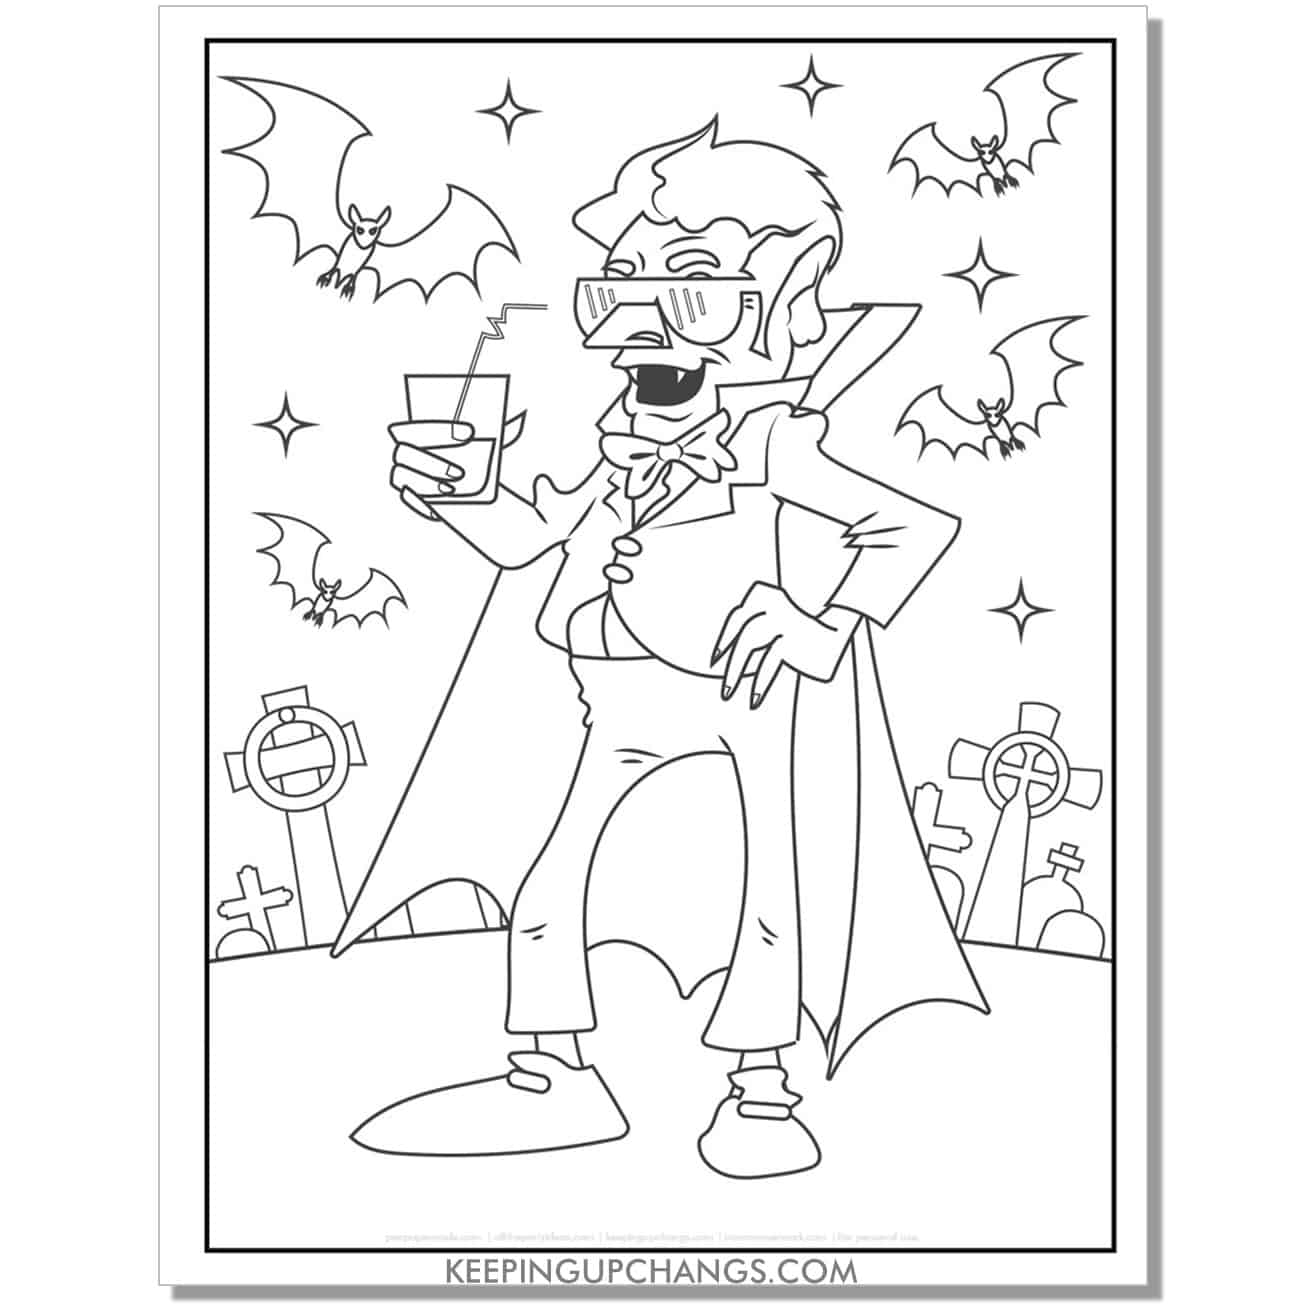 free elvis count dracula vampire coloring page.